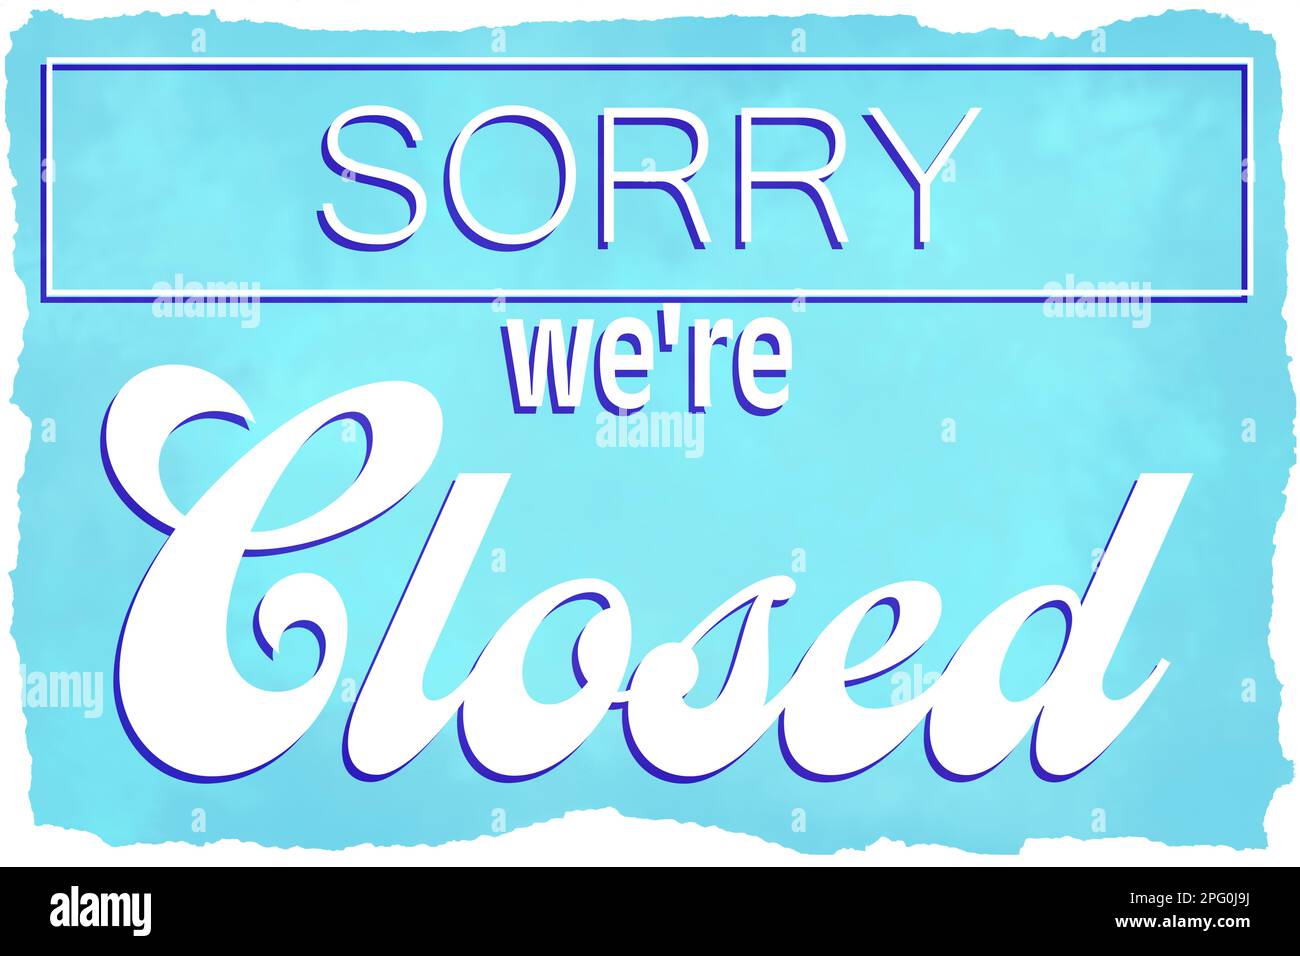 Text Sorry we're CLOSED on turquoise background, illustration. Information sign Stock Photo